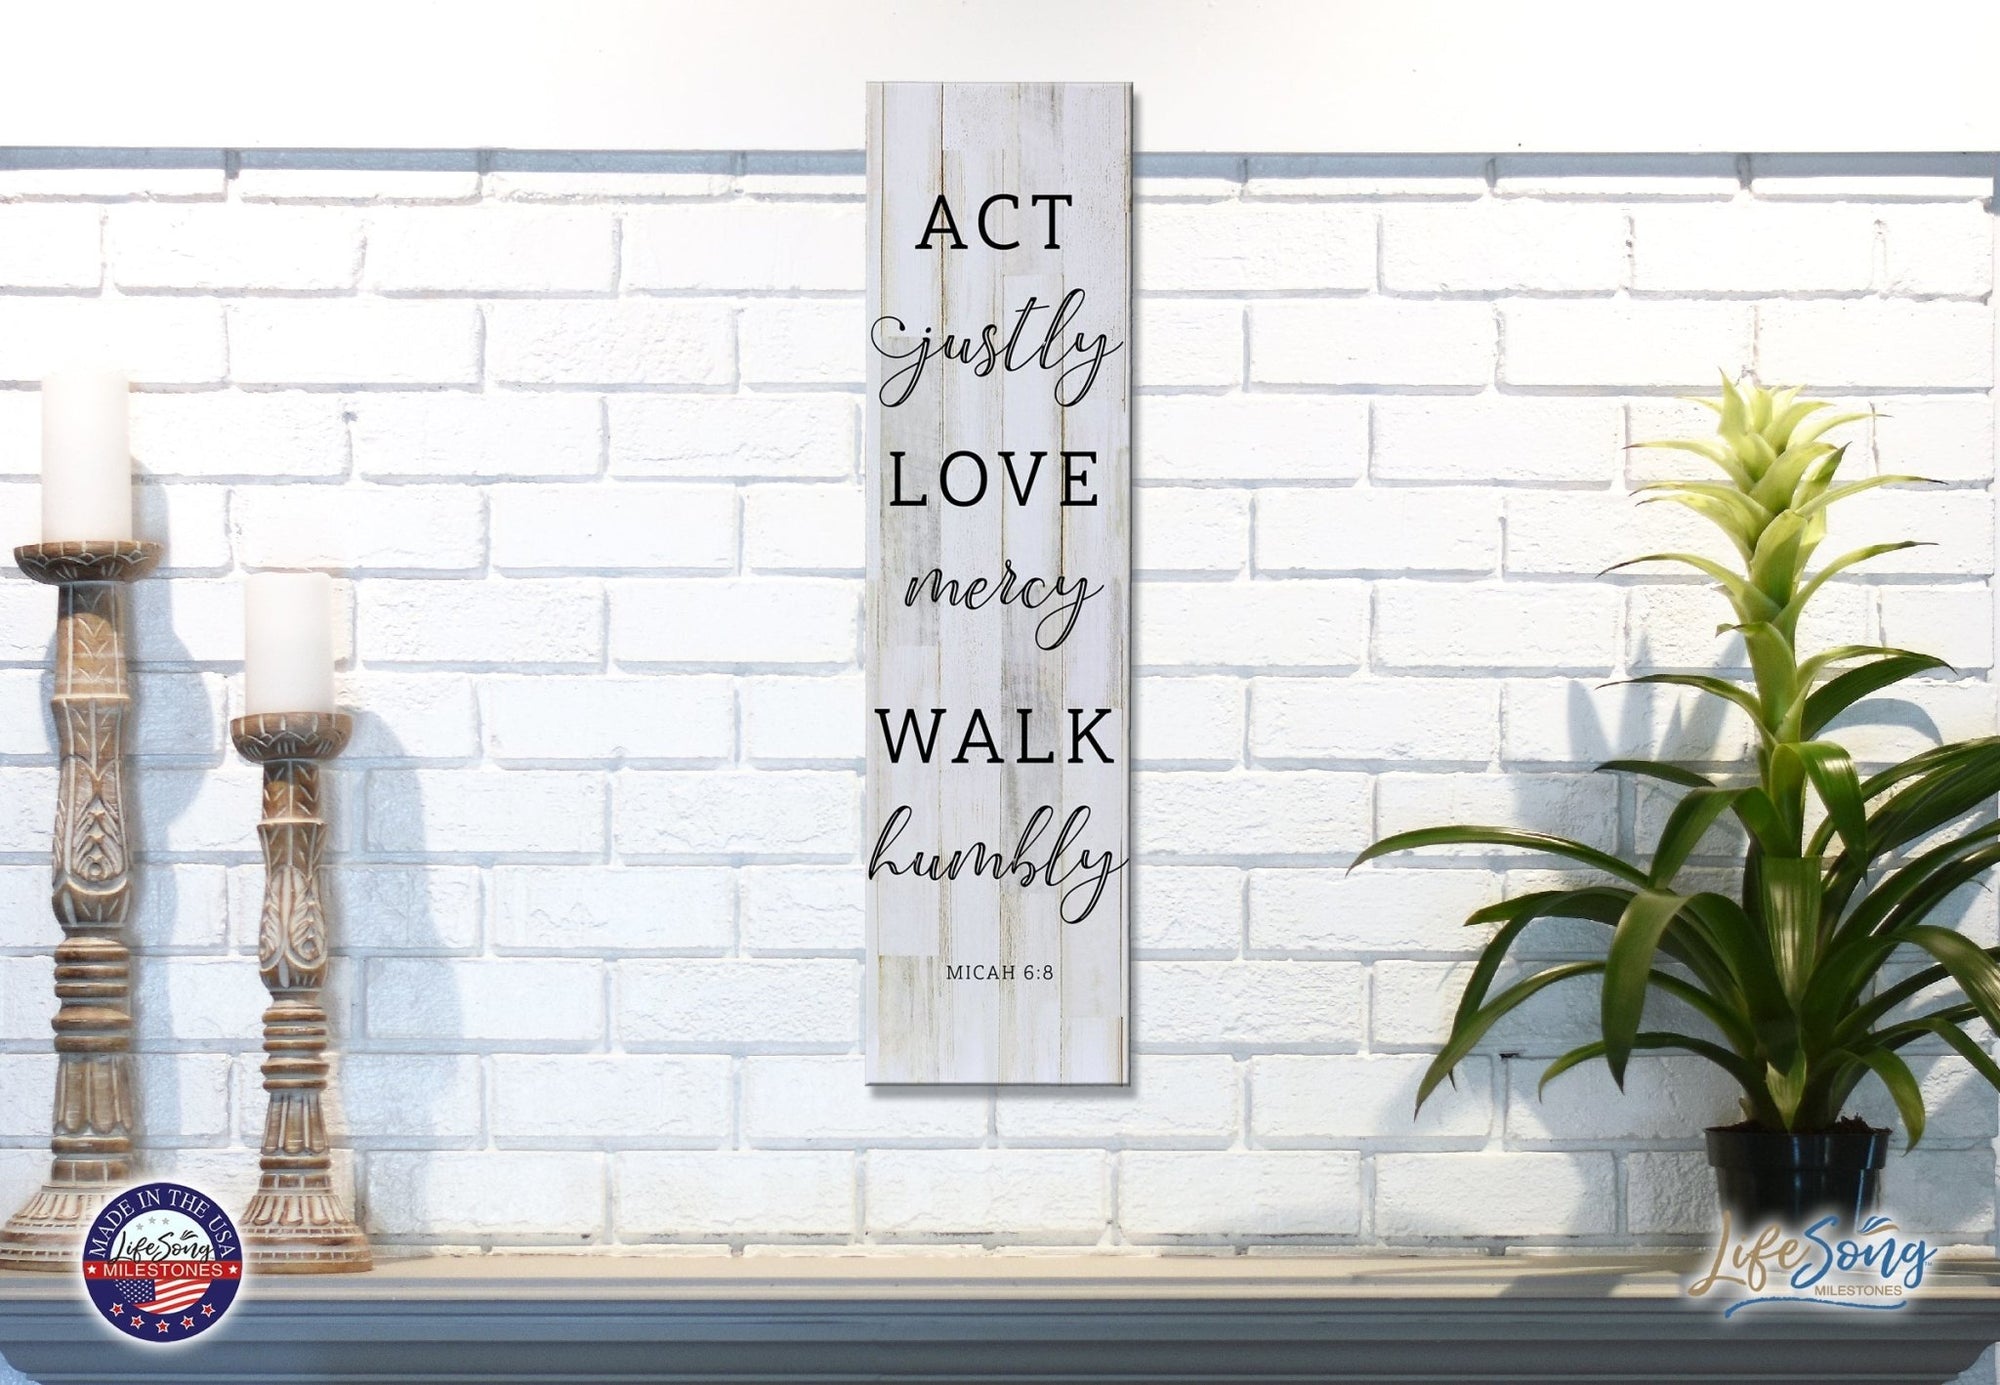 Inspirational Modern Wooden Wall Hanging Plaque 10x40 - Act Justly Love mercy - LifeSong Milestones